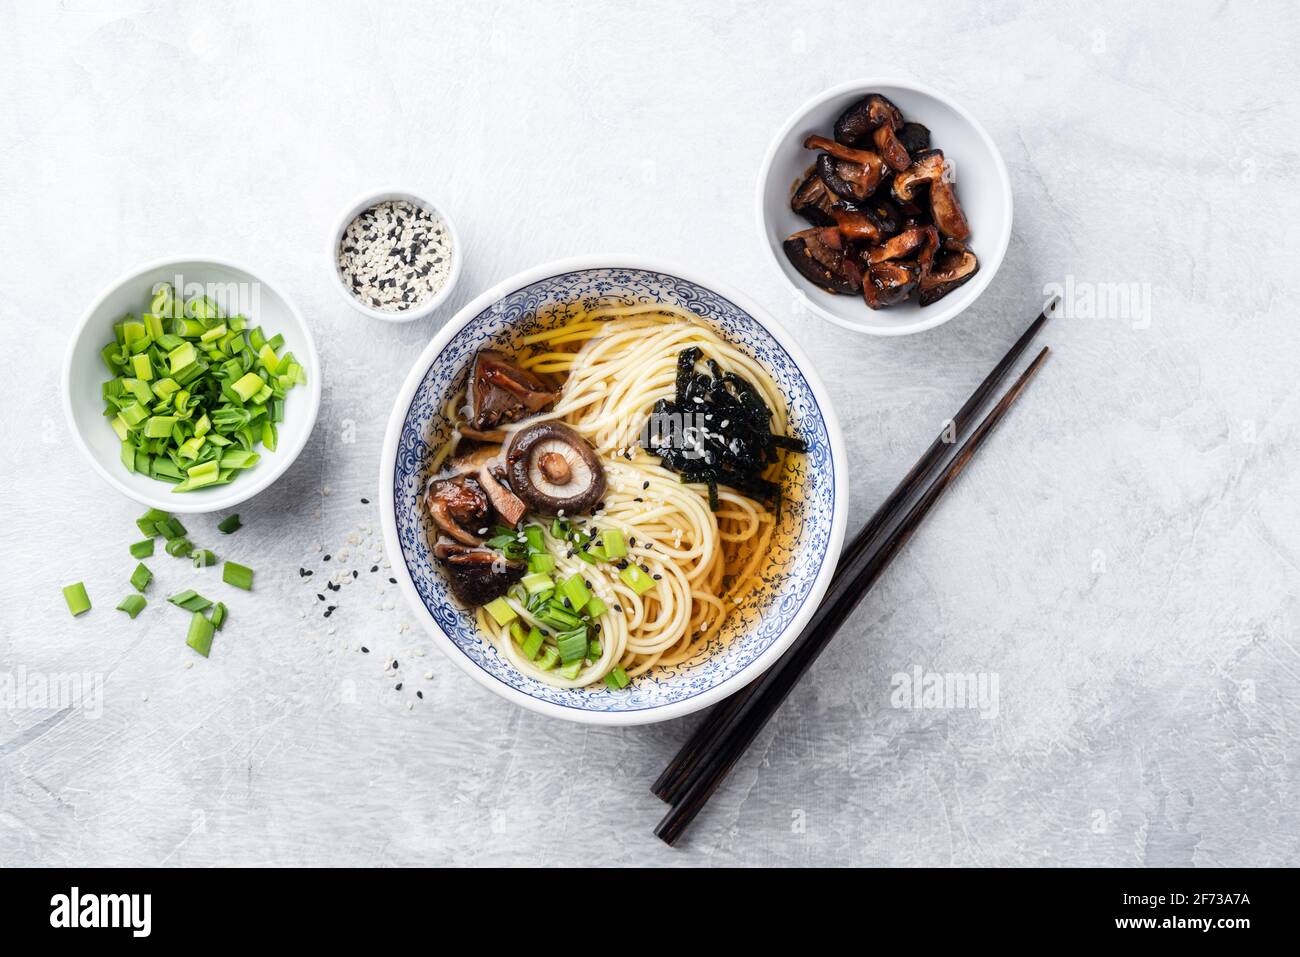 Ramen noodles with shiitake mushrooms, sea weed and spring onion. Top view Stock Photo